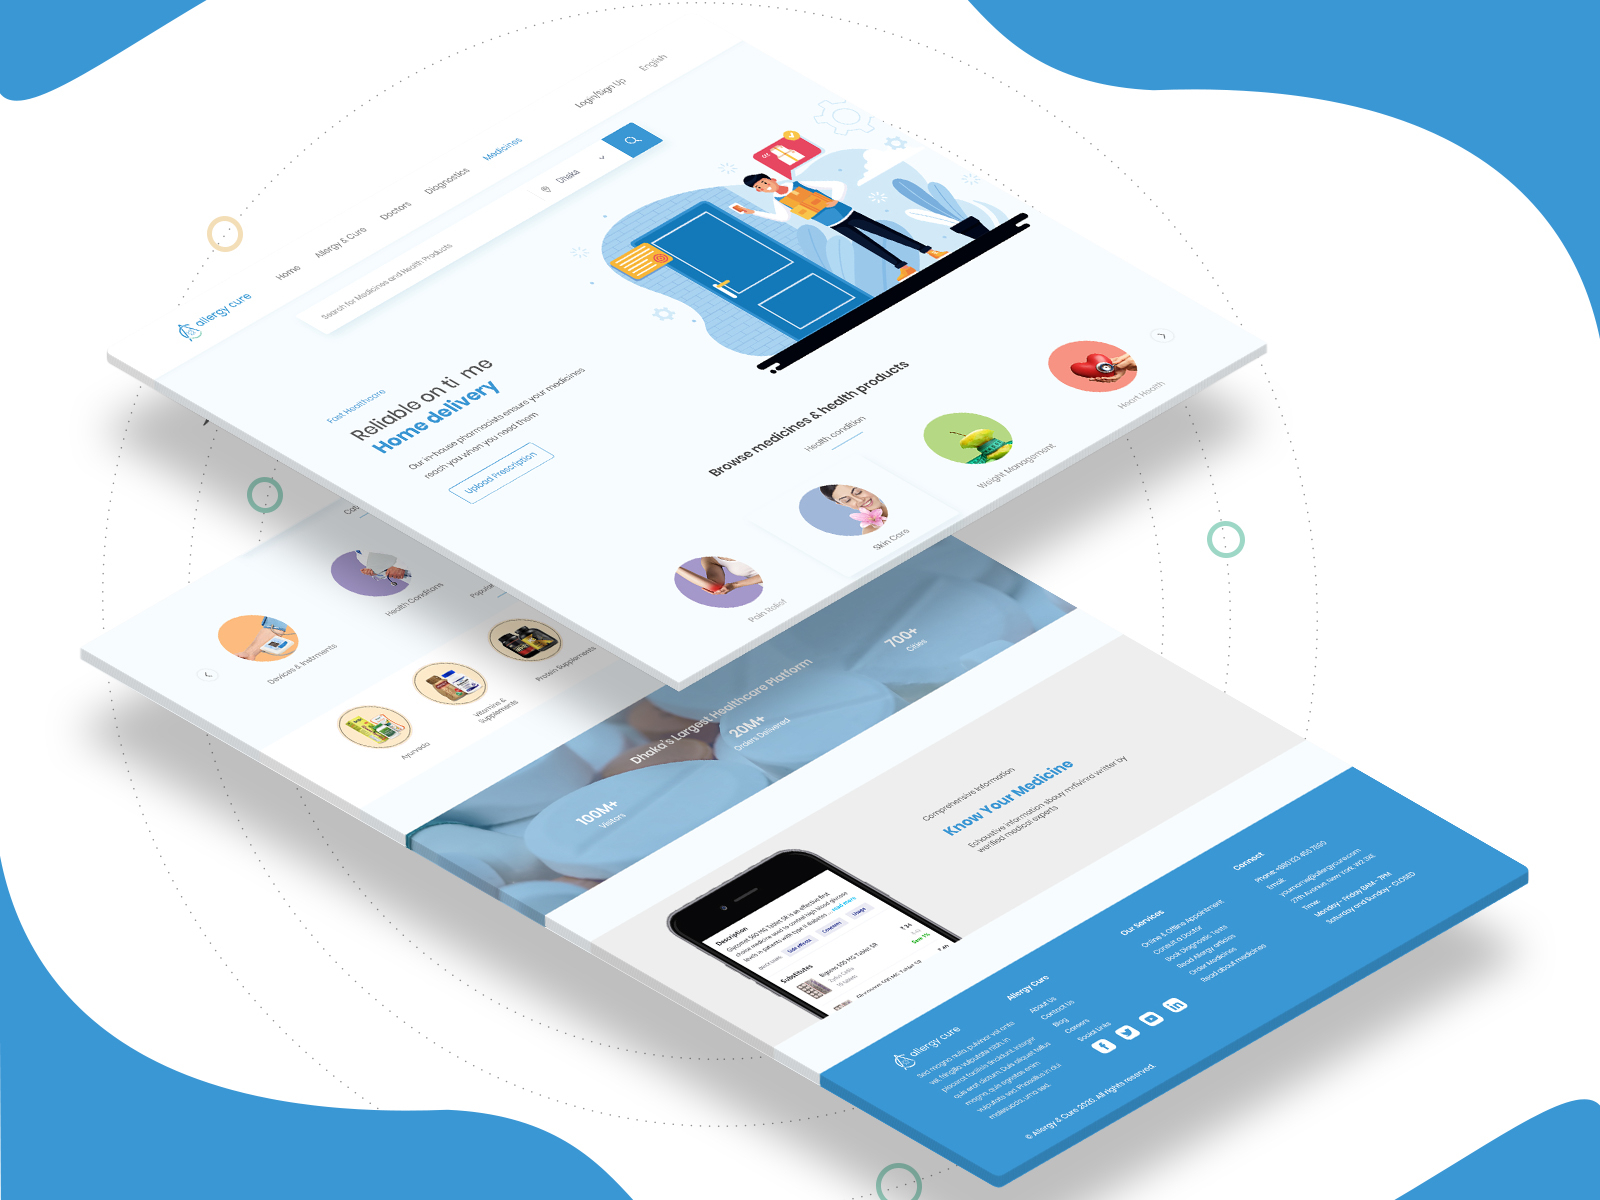 Allergy & Cure Web UI/UX Design by Borno Rifat on Dribbble